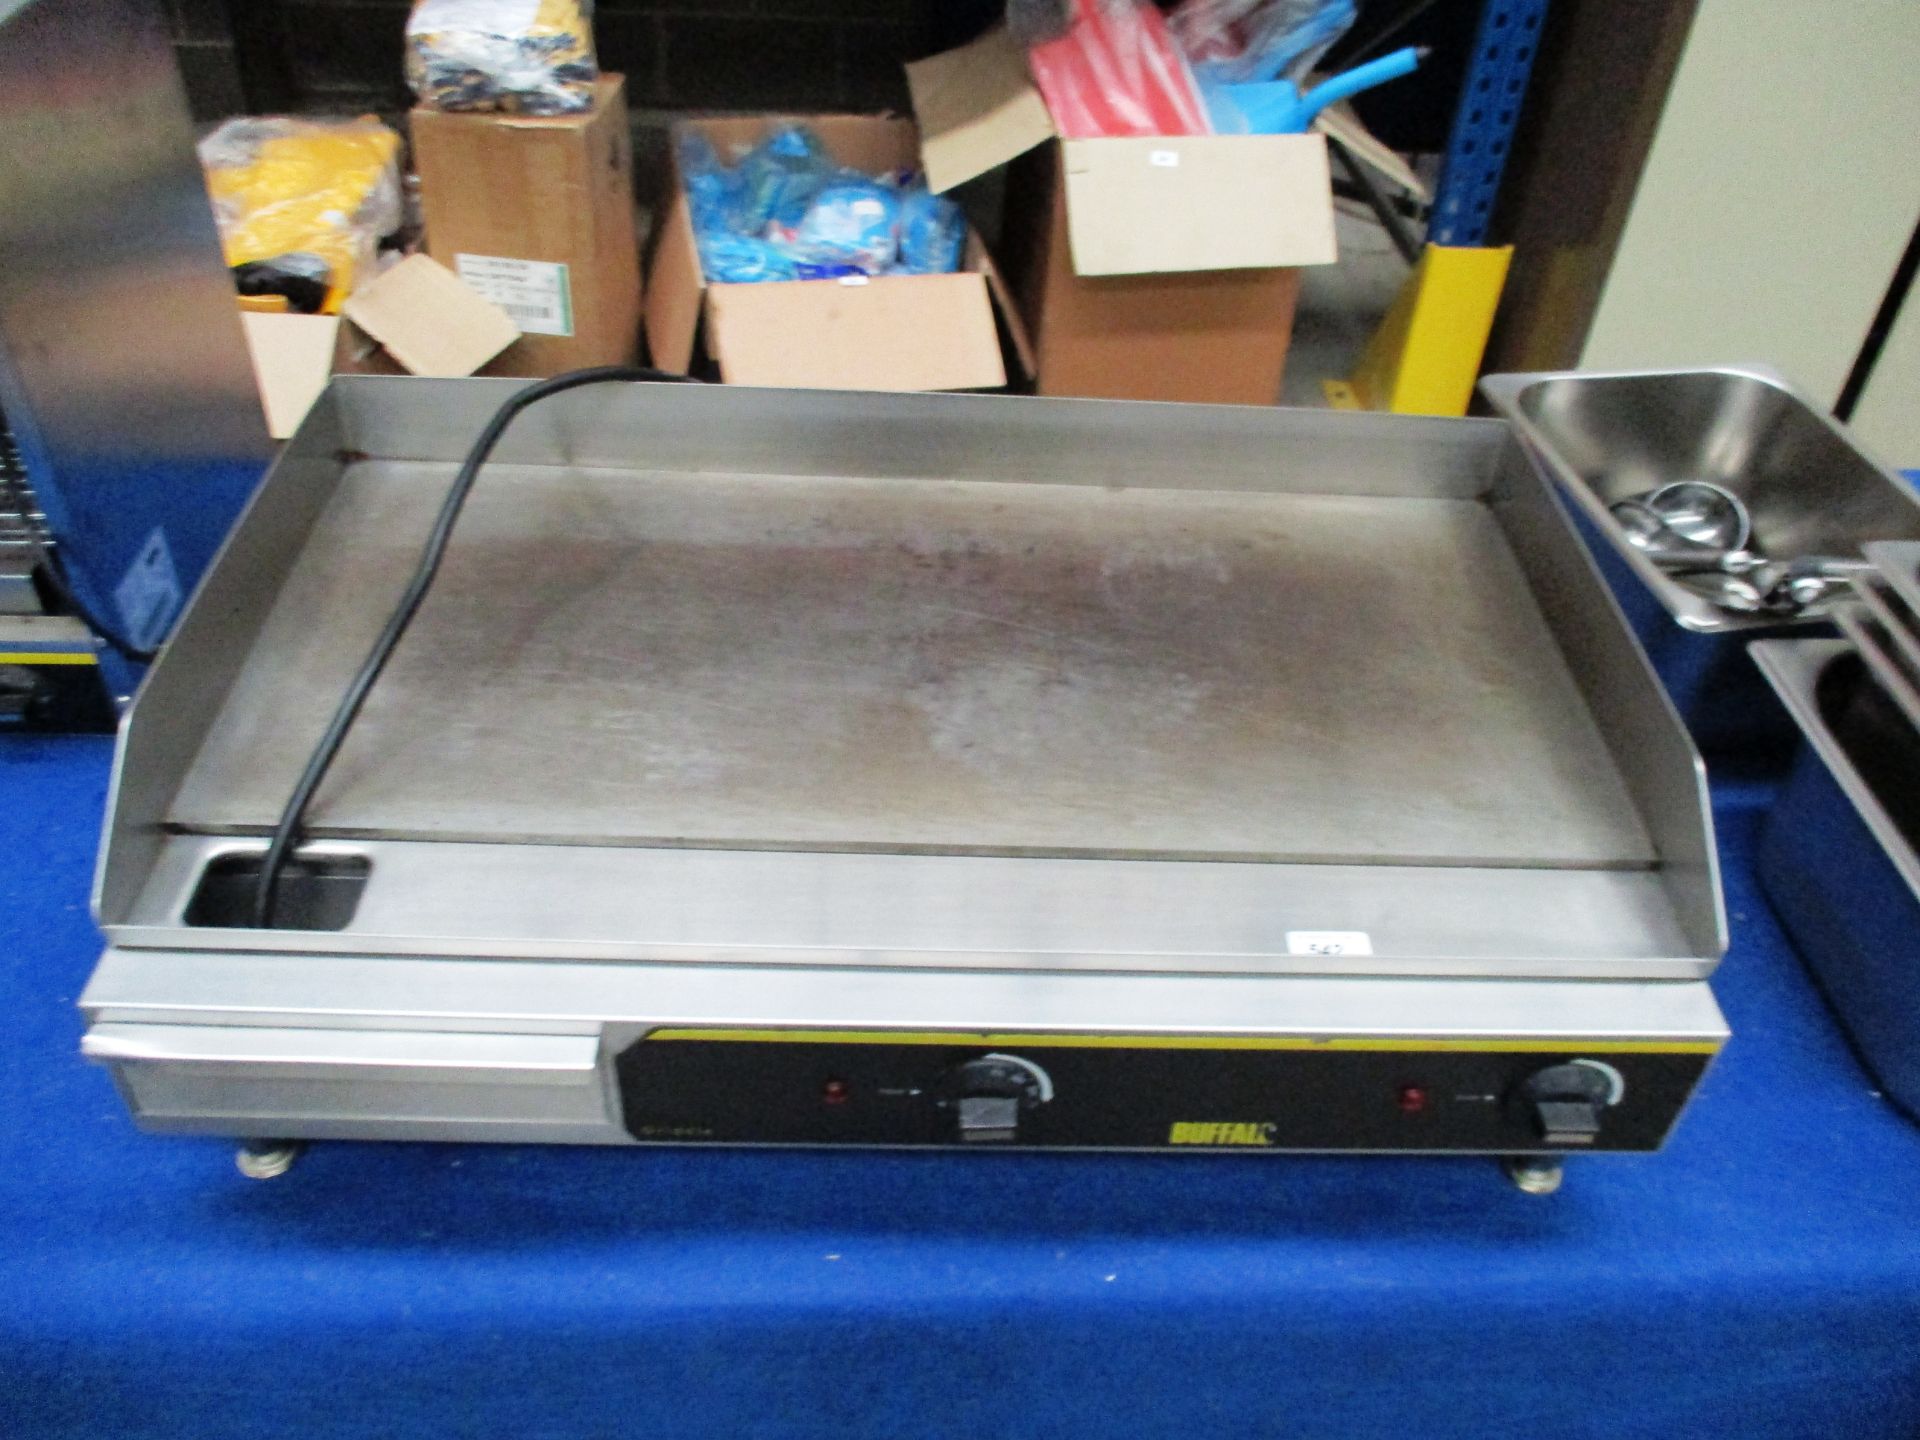 A Buffalo stainless steel griddle 240v